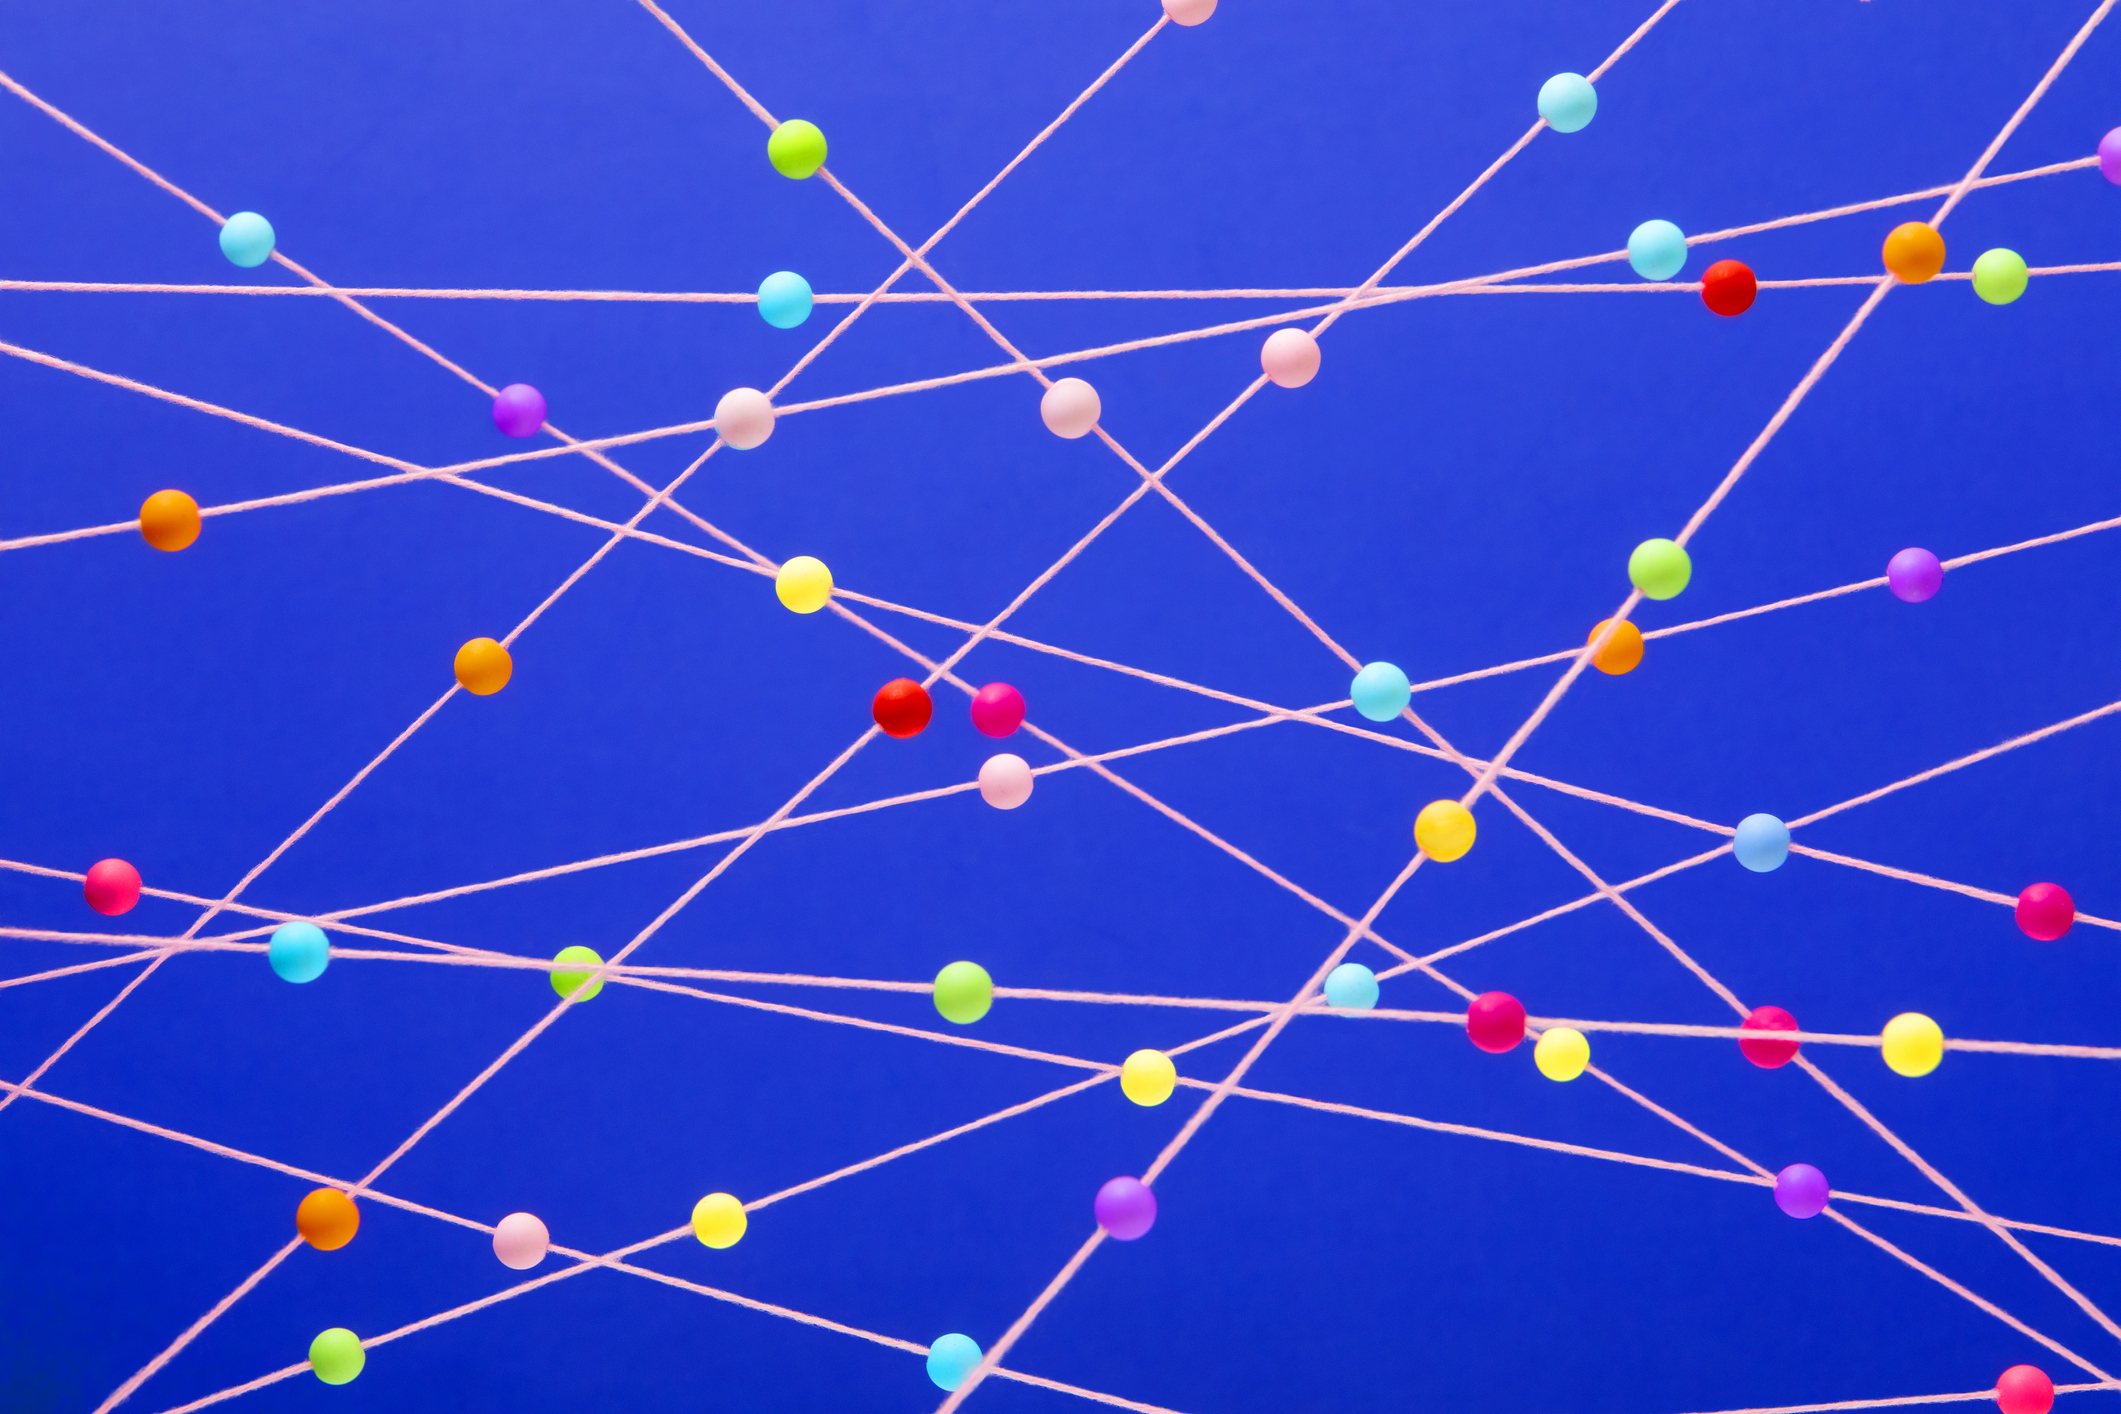 Bright multi-colored balls randomly arranged on pink strings on a blue background, used in post about beterdata